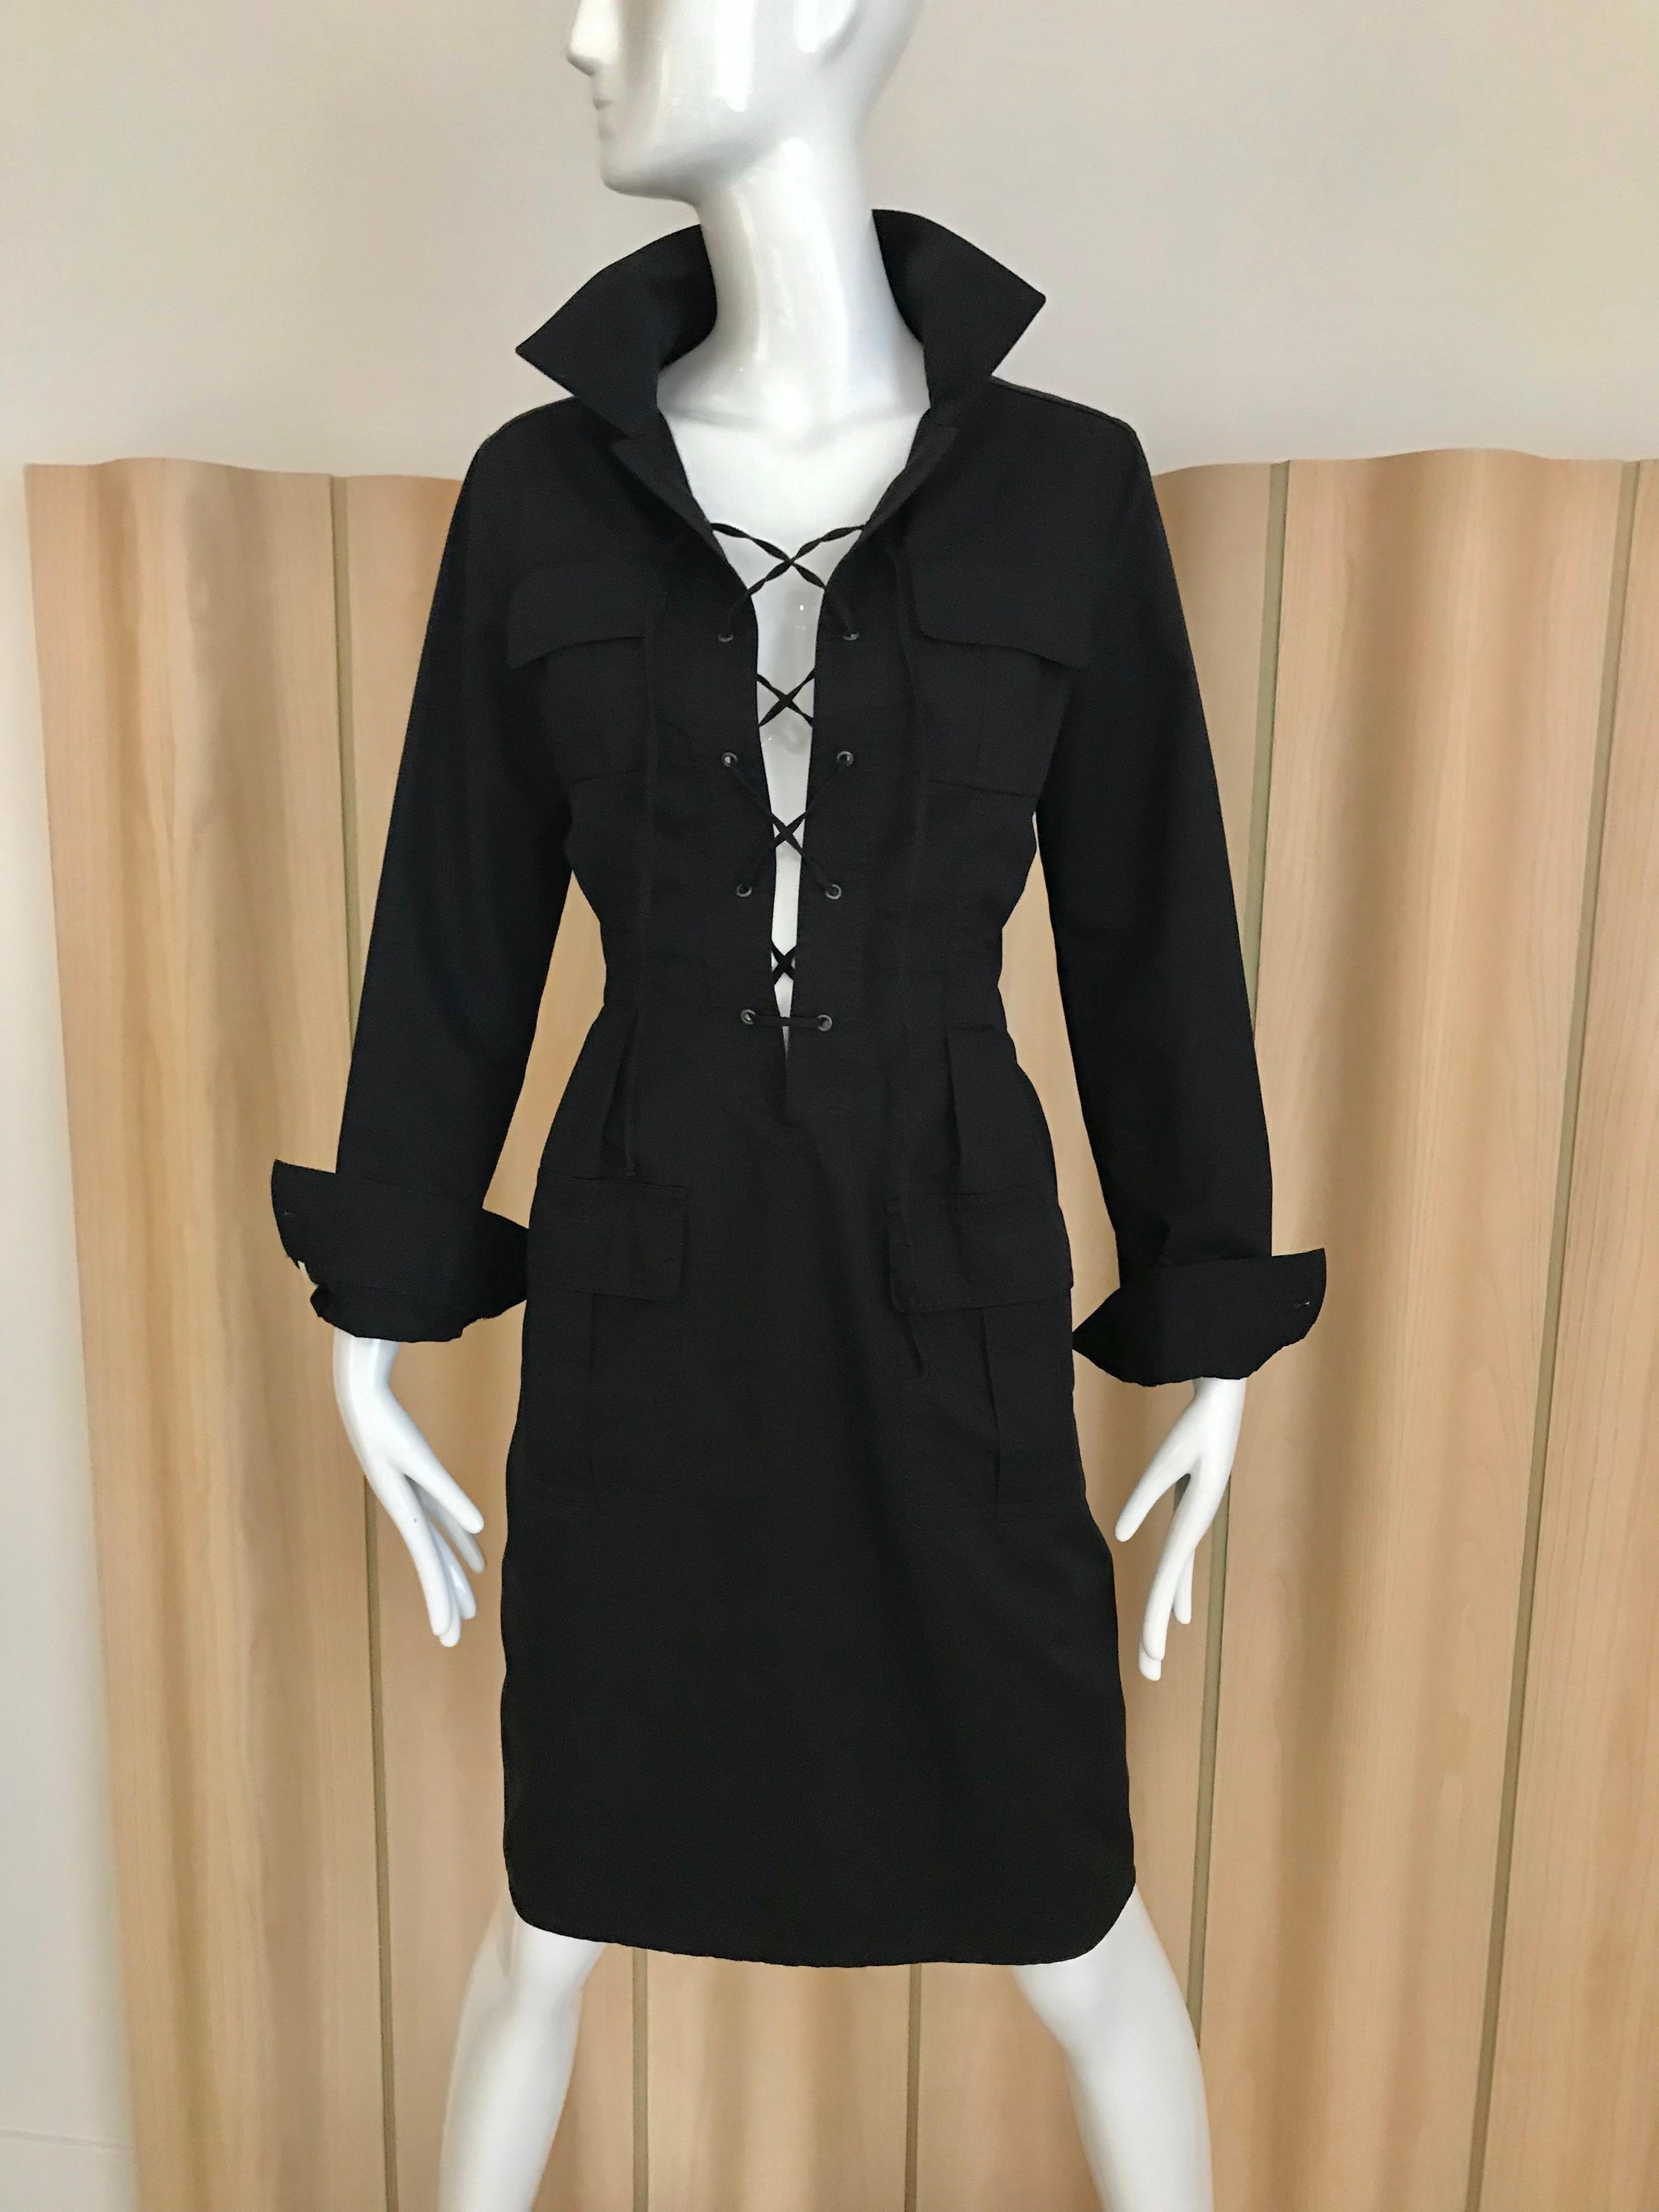 Vintage Yves Saint Laurent Long sleeve back cotton lace up safari style dress. Knee length and dress is missing belt. Size F36. US SIZE 4
Measurement: 
Bust: 34 inches